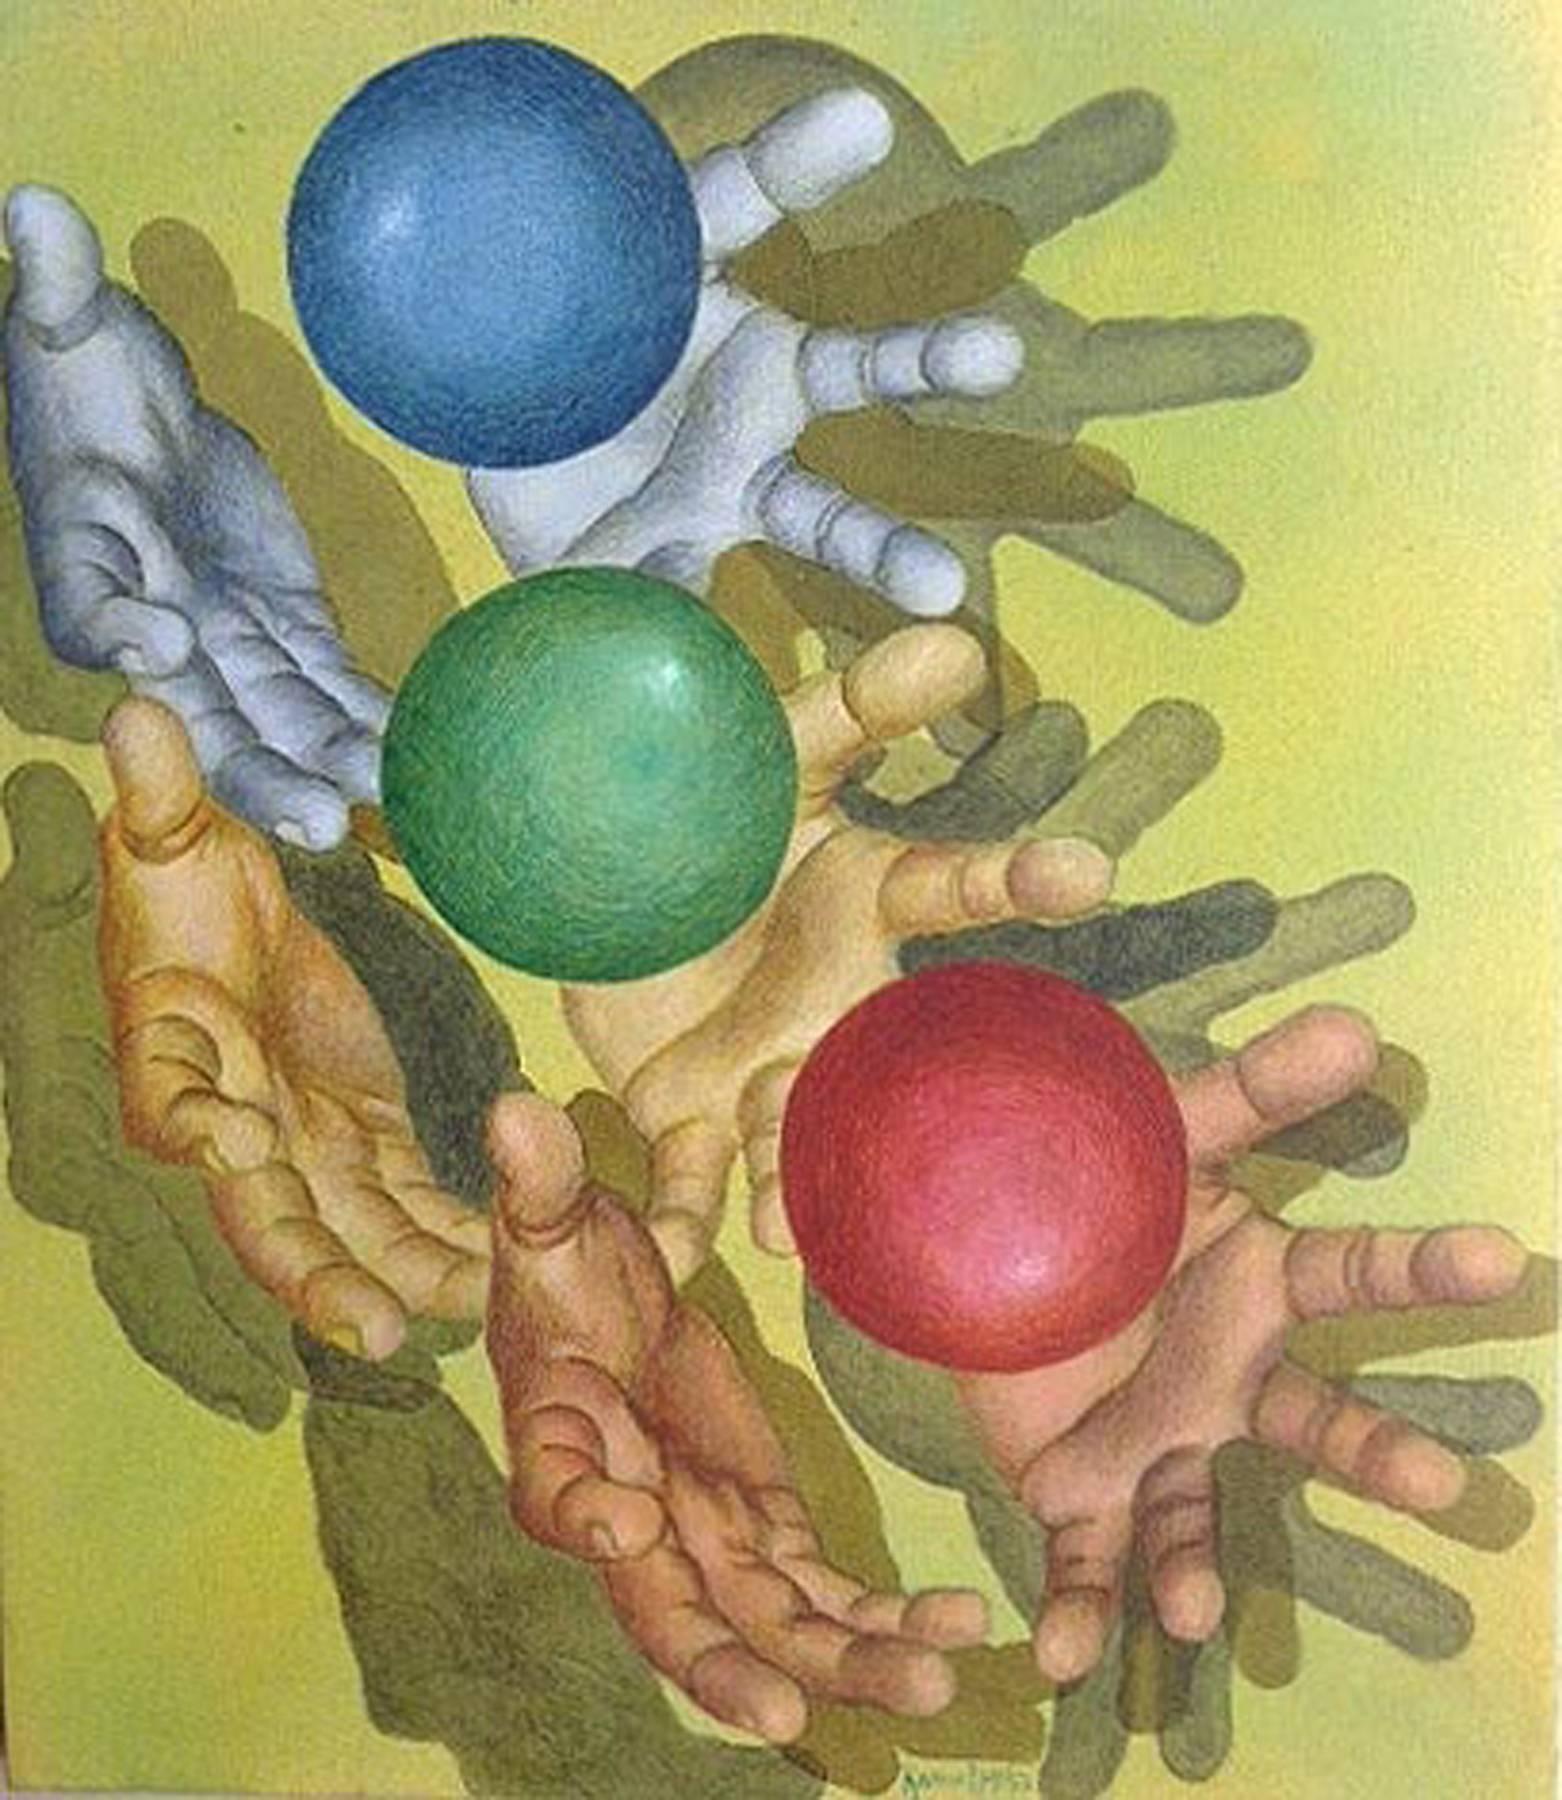 Kamal Mitra Figurative Painting - Play, Balls, Acrylic on Canvas, Blue, Red, Green by Indian Artist "In Stock"